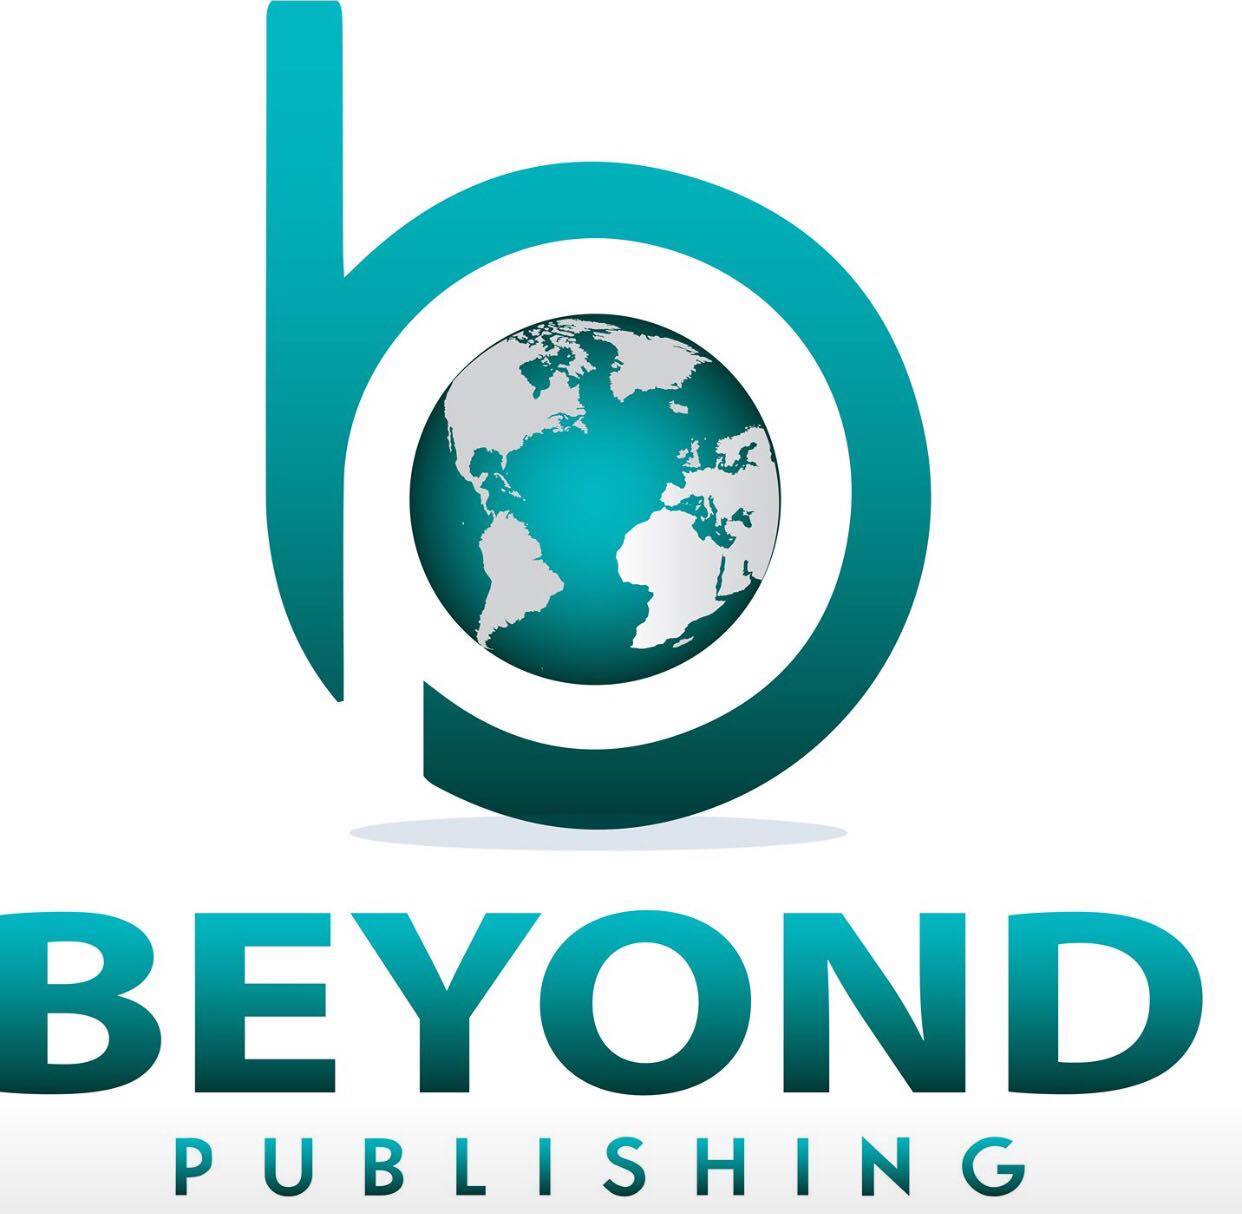 A DEEPER WALK - Searching for a Better Understanding of Major Bible Topics Published by Los Angeles Publisher - Beyond Publishing